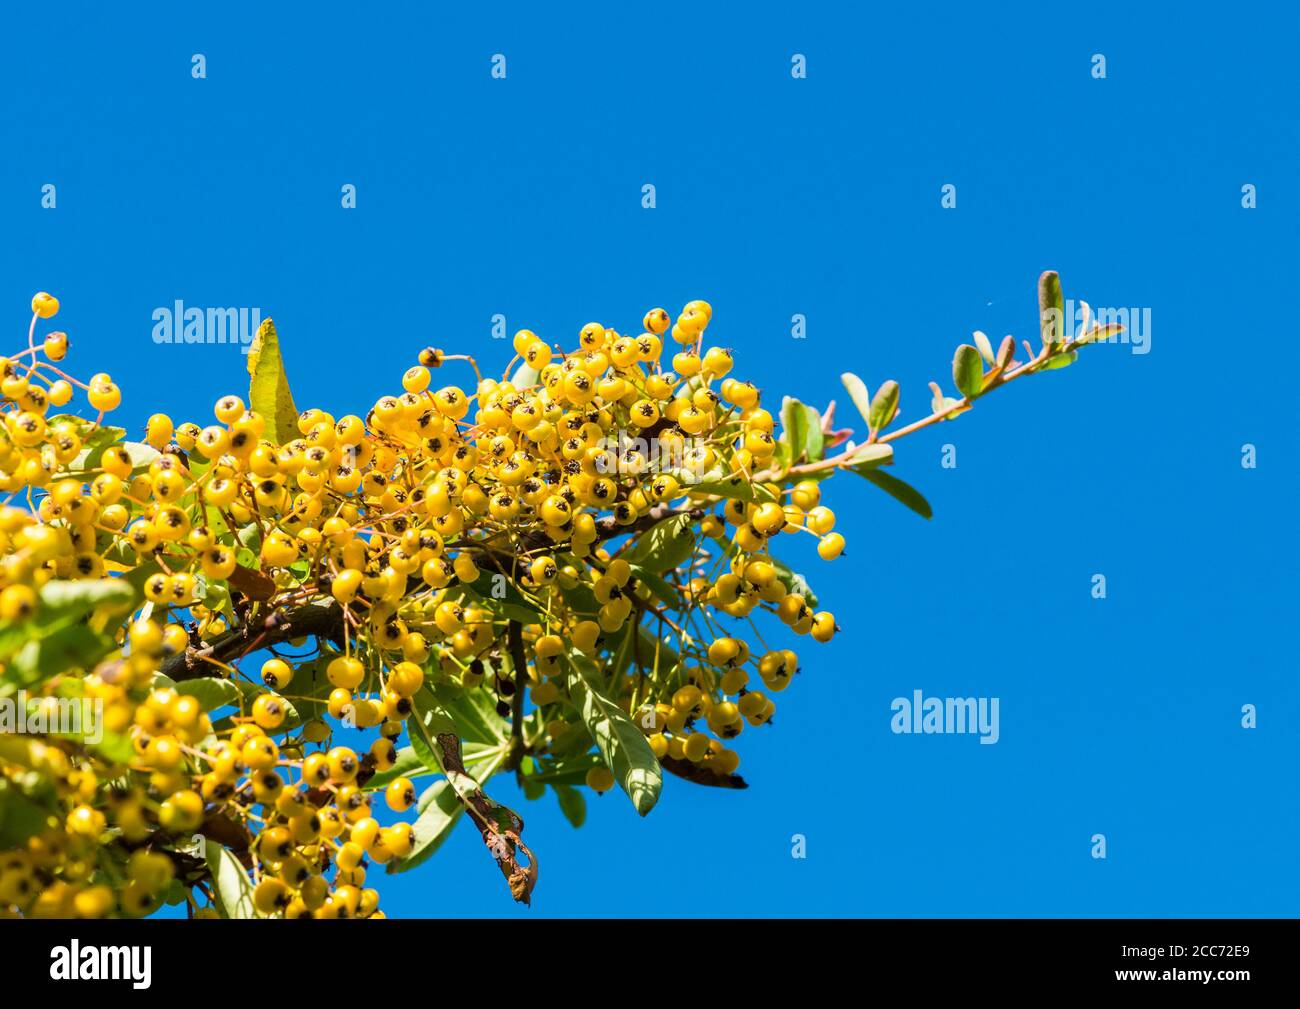 A macro shot of some yellow pyracantha bush berries against a blue sky. Stock Photo